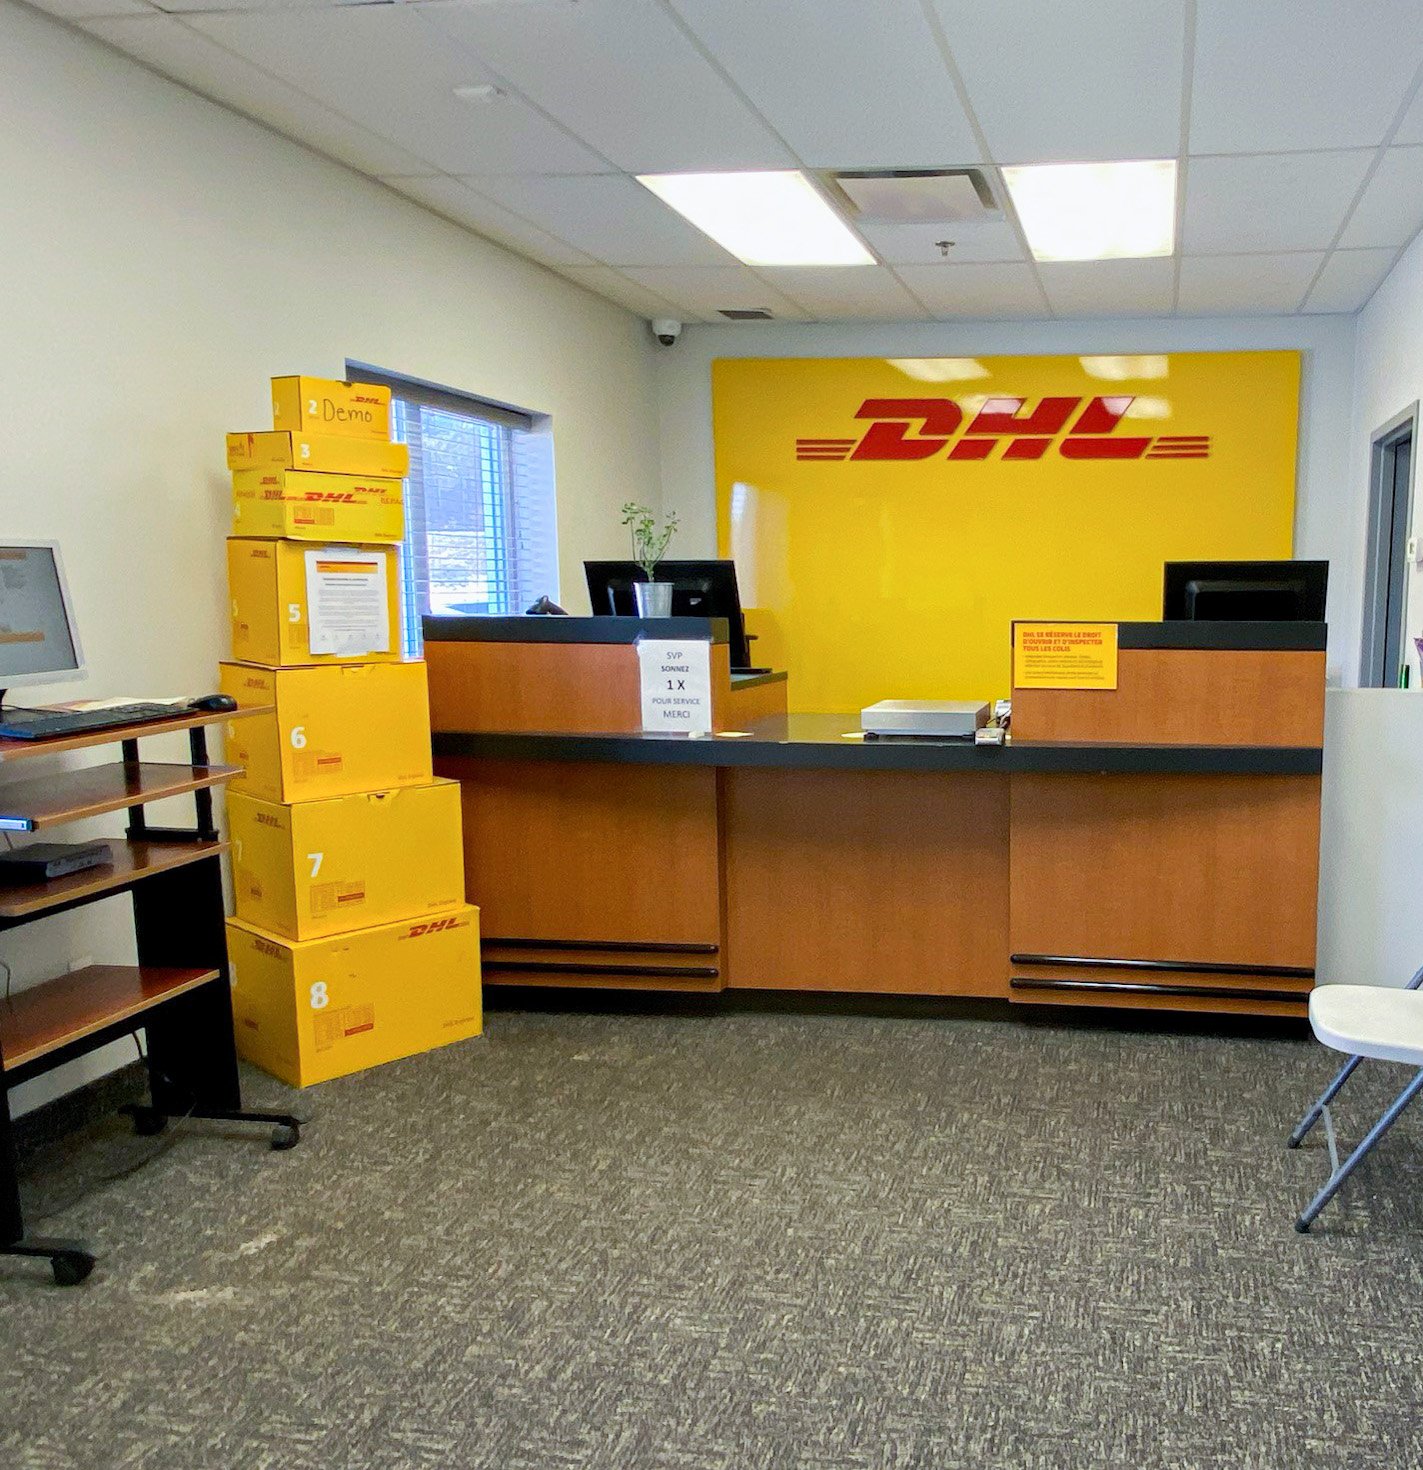 DHL hero section